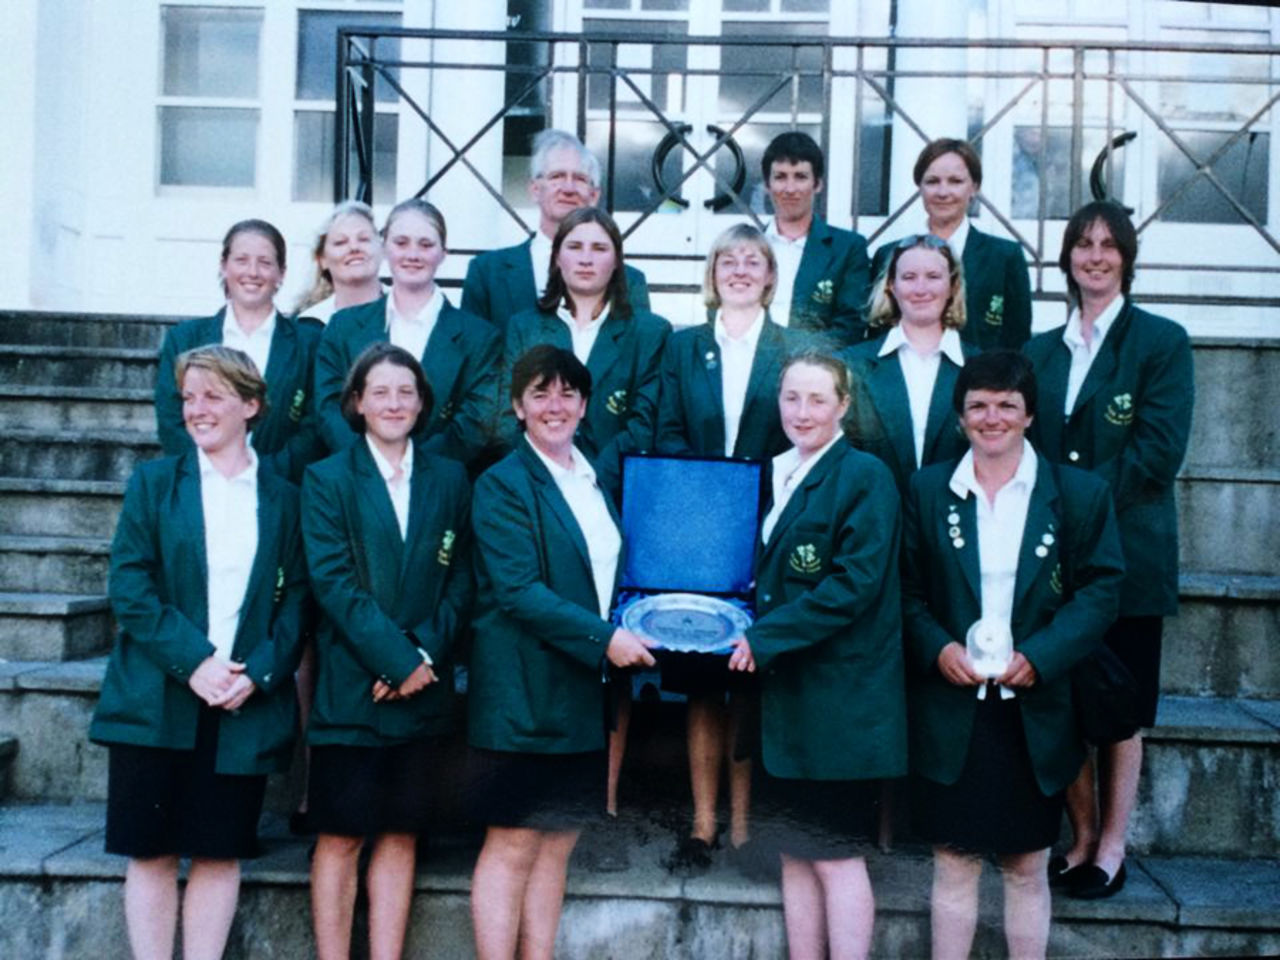 The Ireland women's squad that played the country's first Test